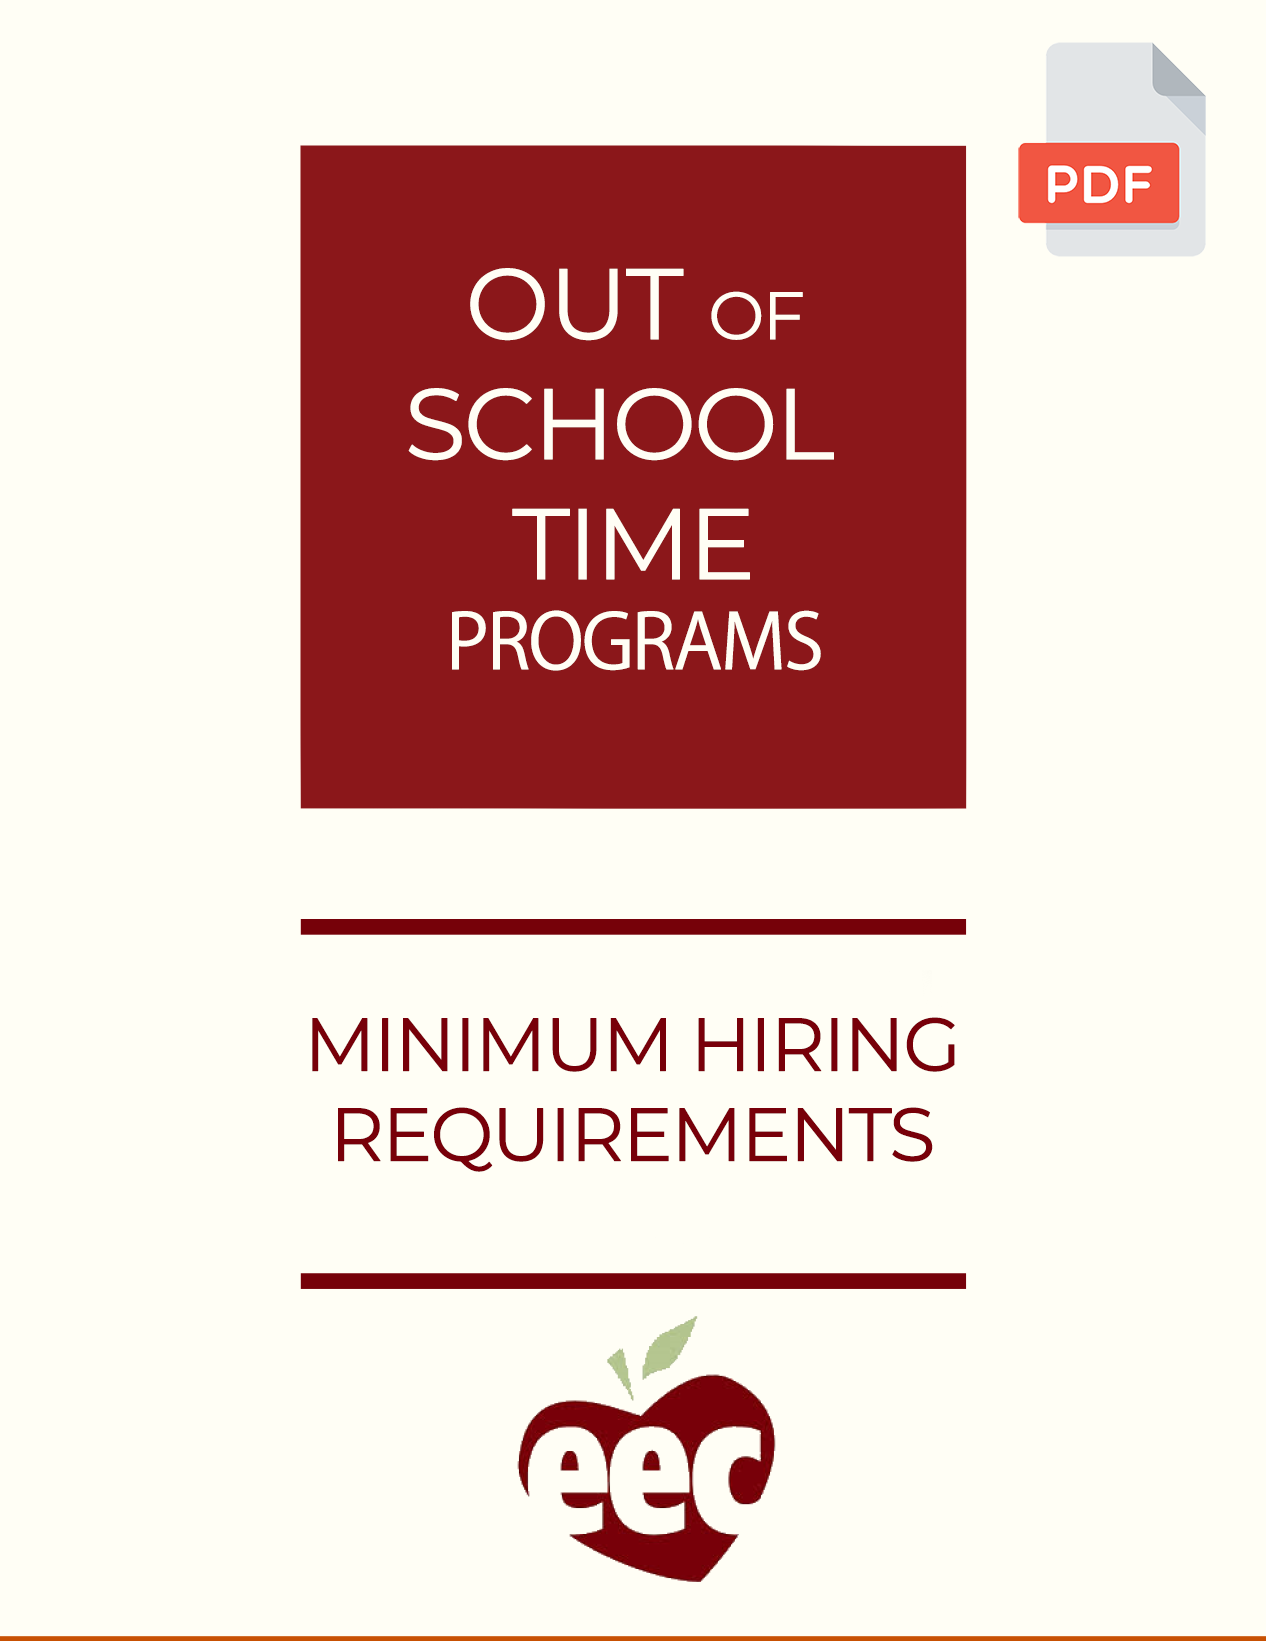 Select to open the Minimum Hiring Requirements checklist for Out of School Time Programs